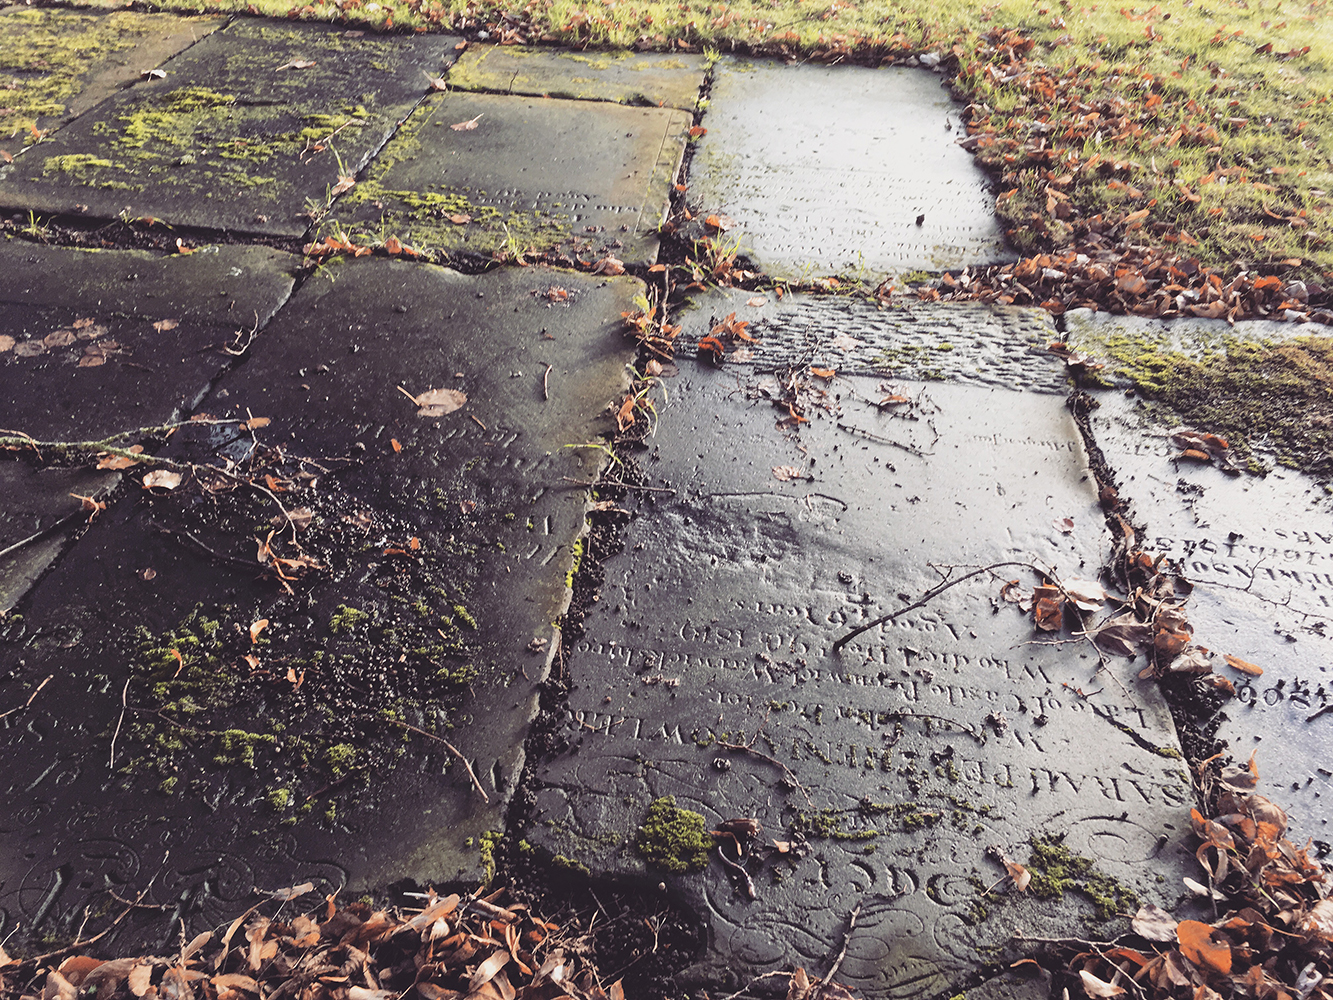 St. Mary’s Church, Stafford – Gravestones and typography